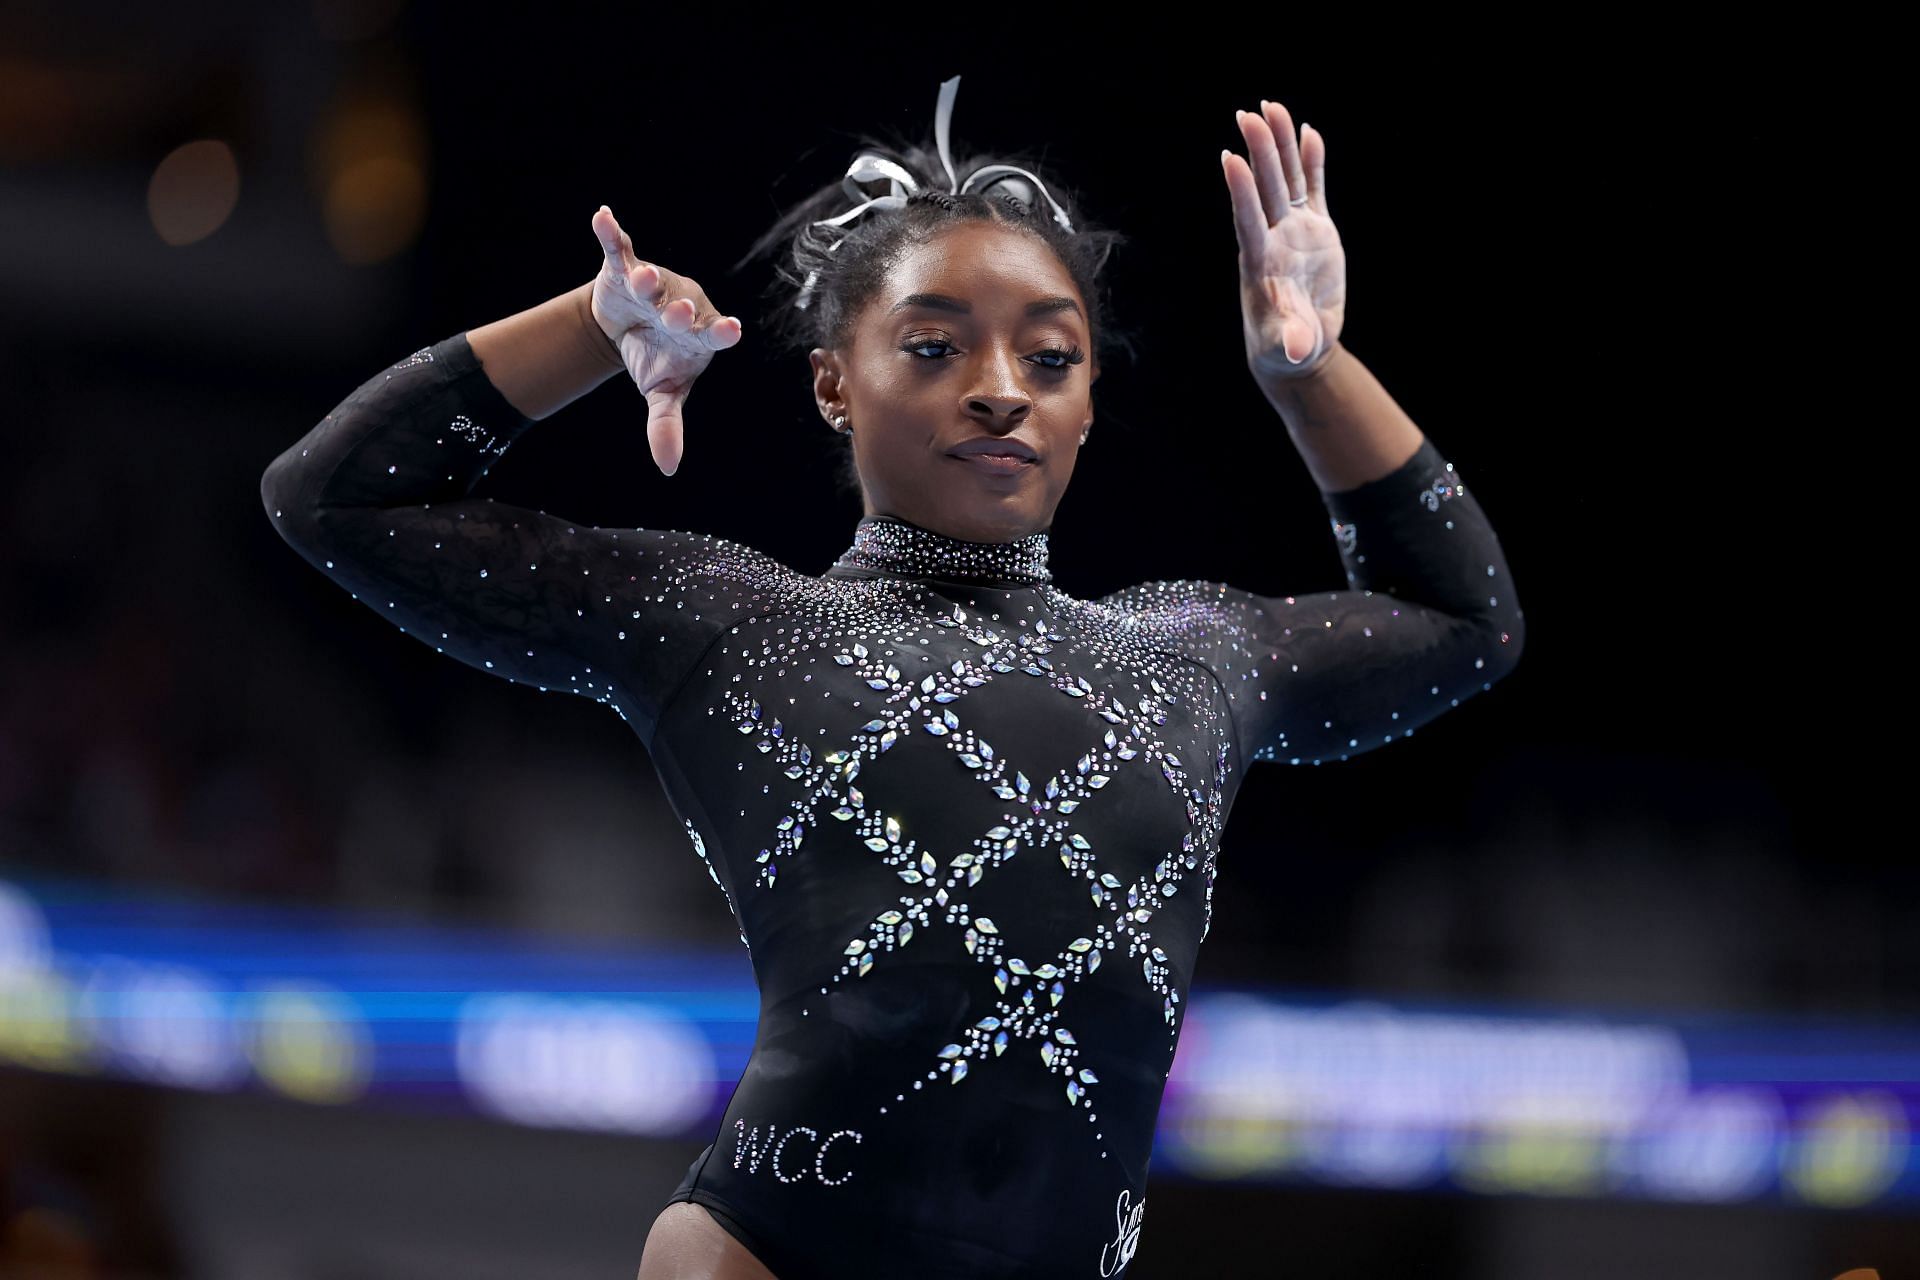 Simone Biles competes in the floor exercise at the 2023 U.S. Gymnastics Championships at SAP Center in San Jose, California.